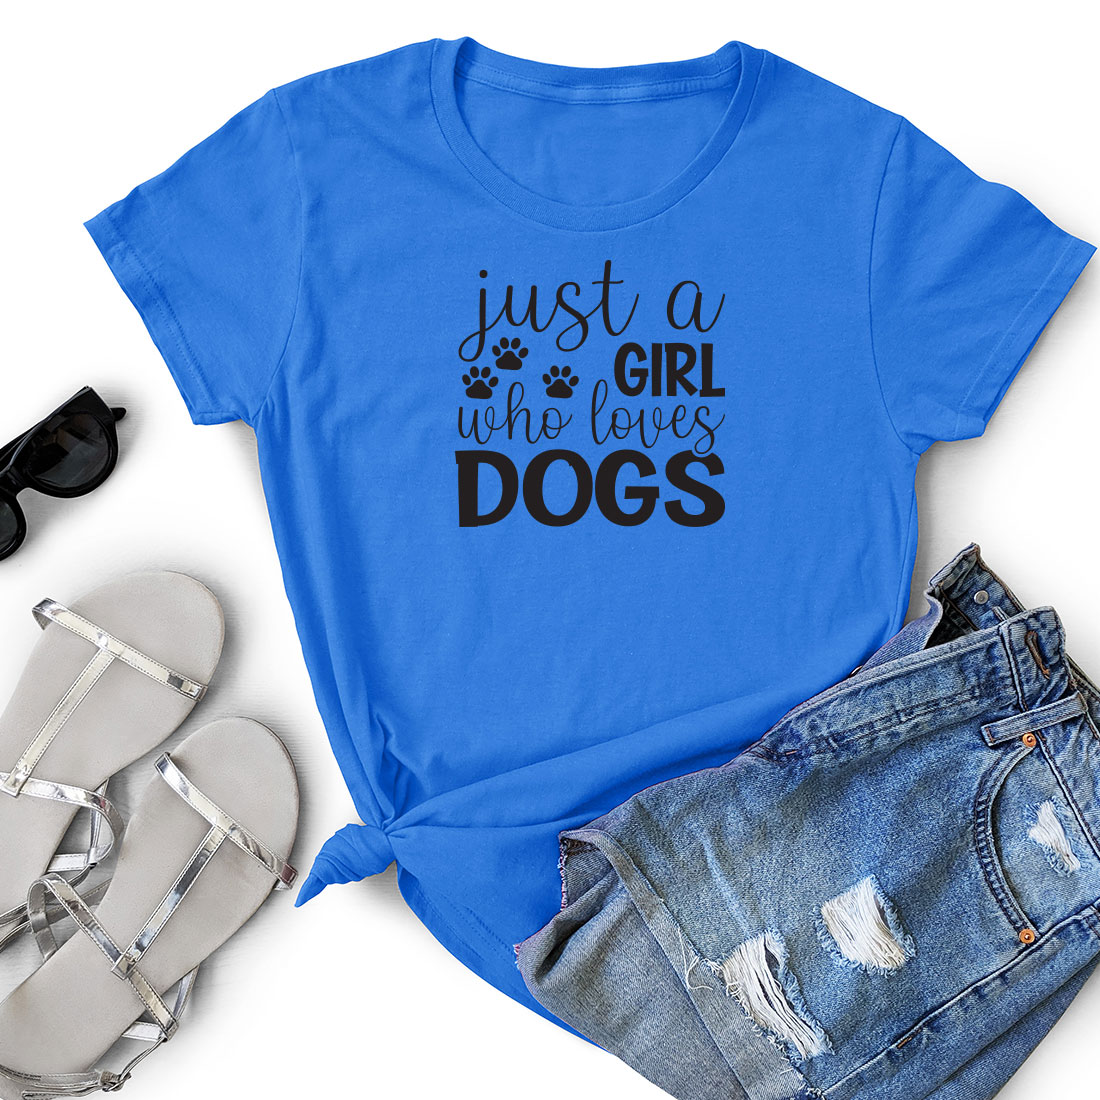 Blue shirt that says just a girl who loves dogs.